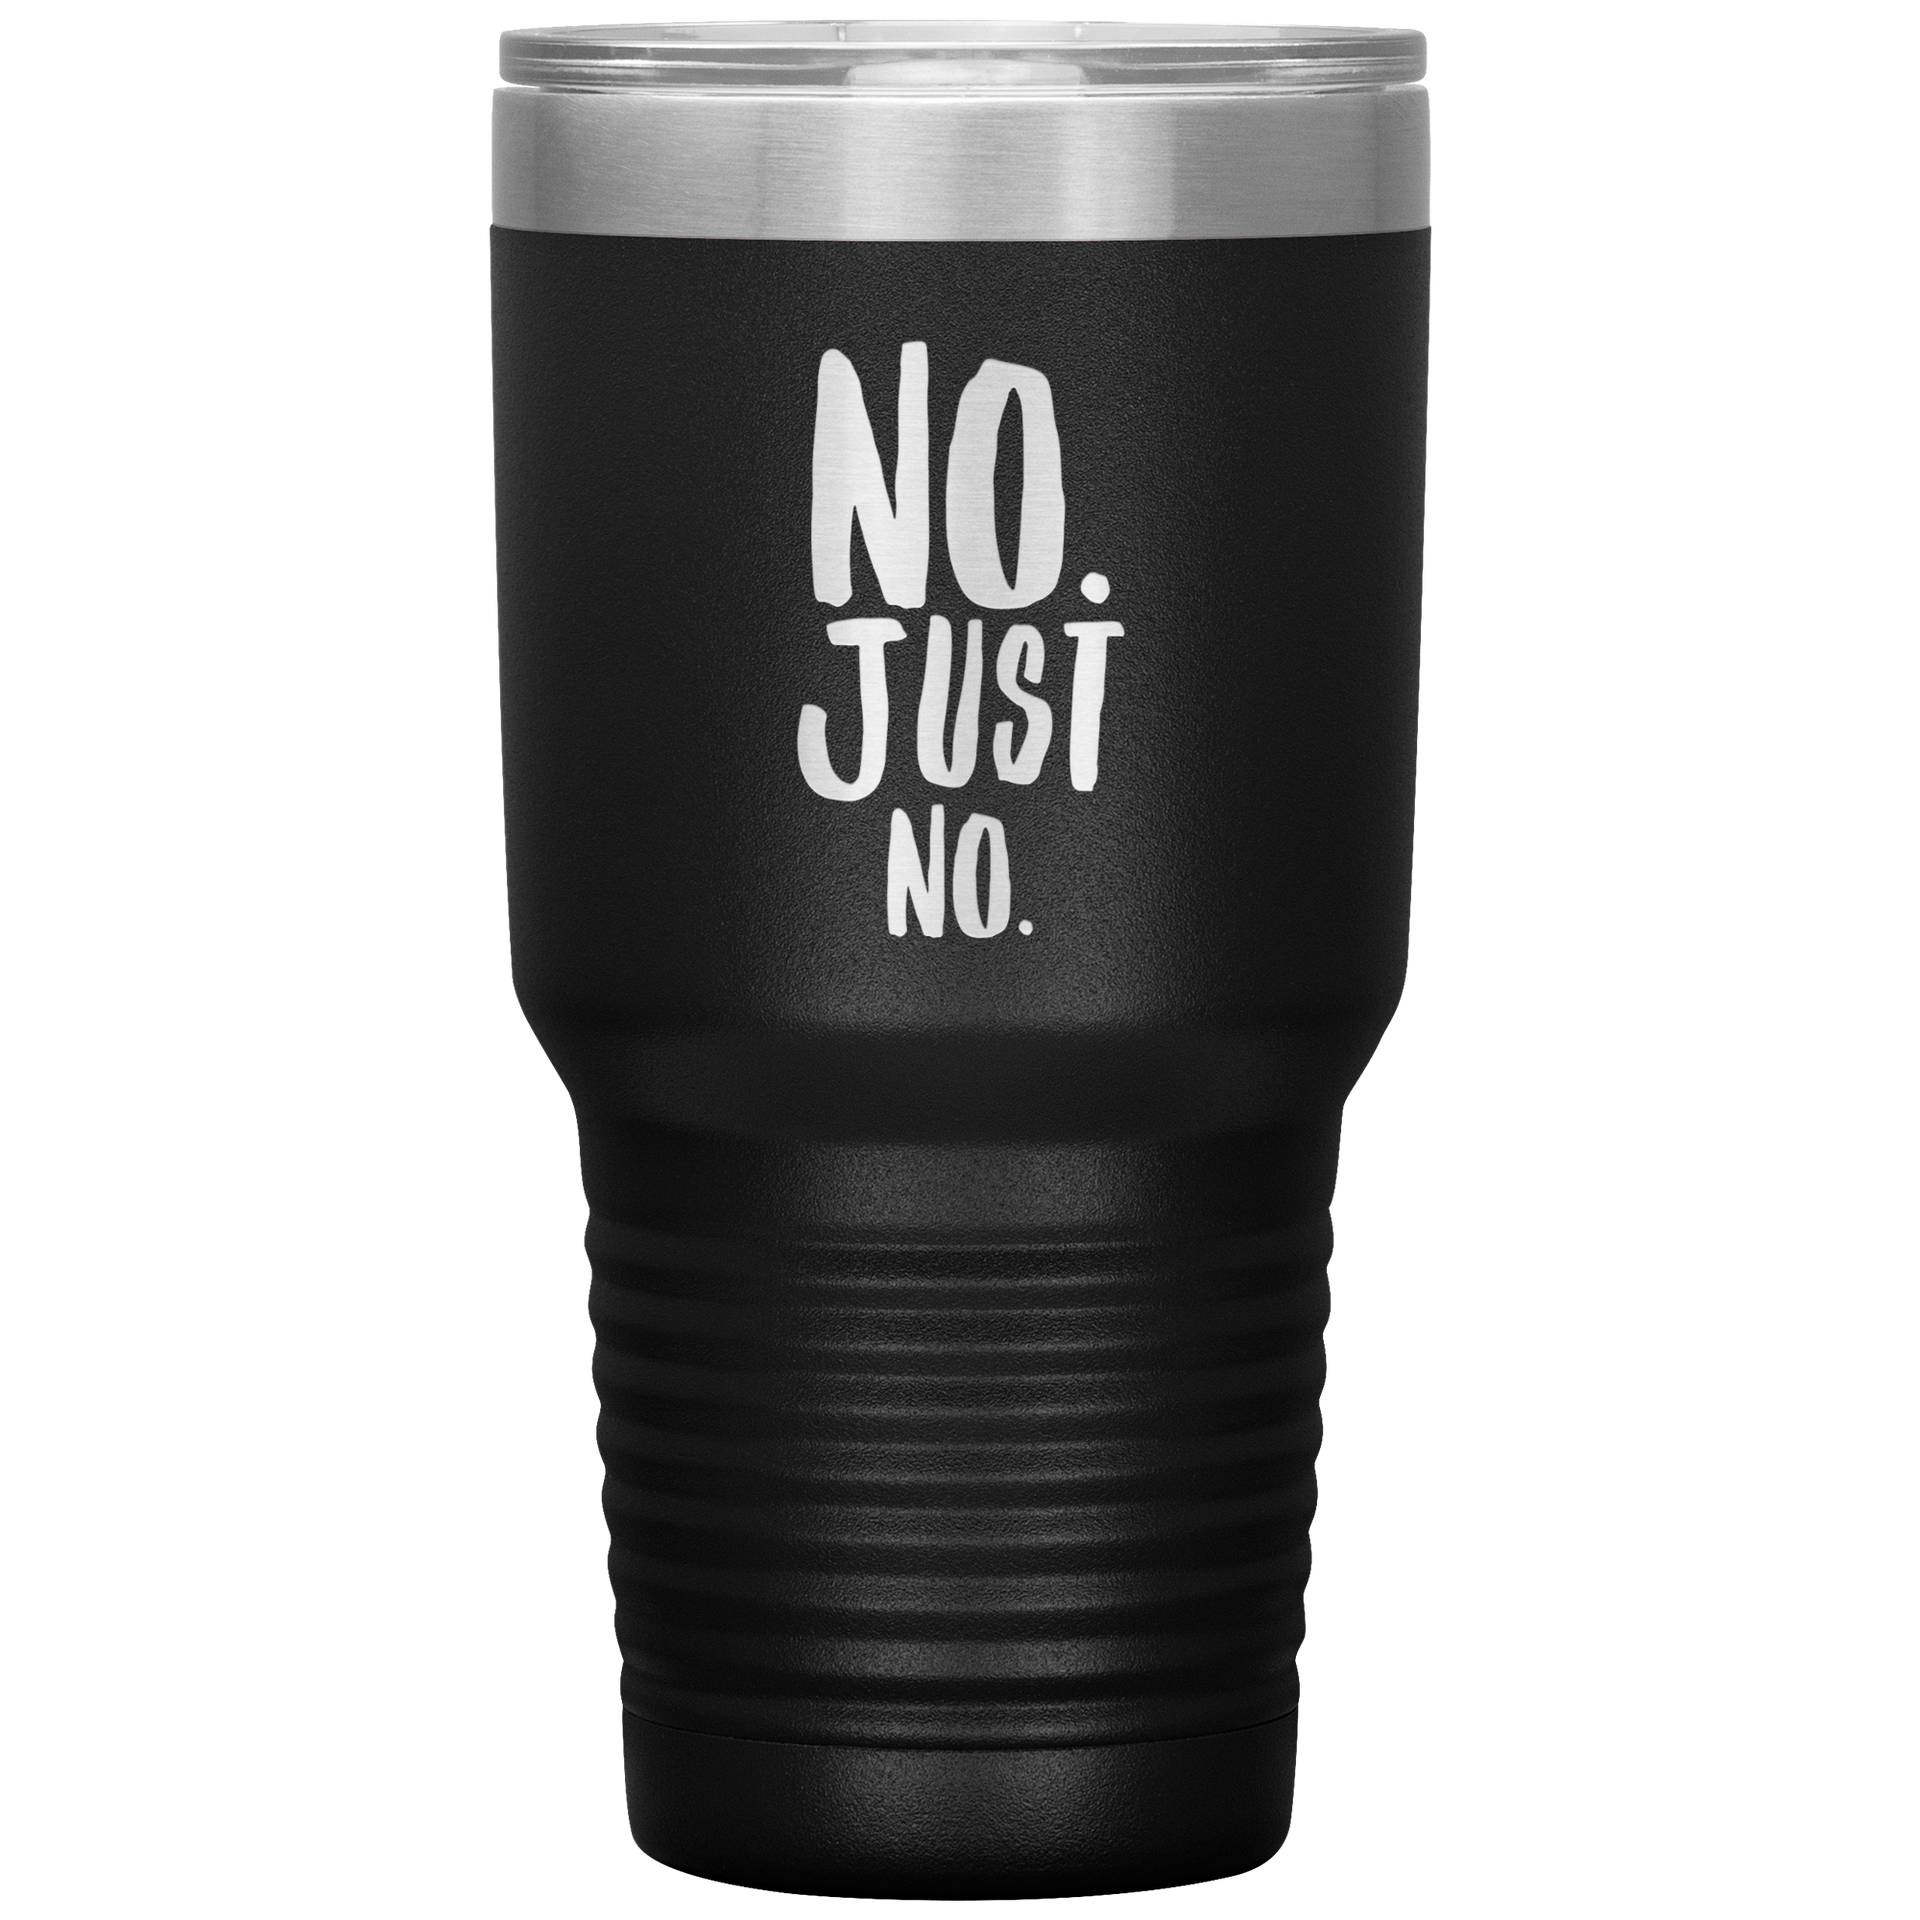 Stainless Steel Insulated Water Bottle Tumbler with Built-in Straw. –  Nicolas Howard